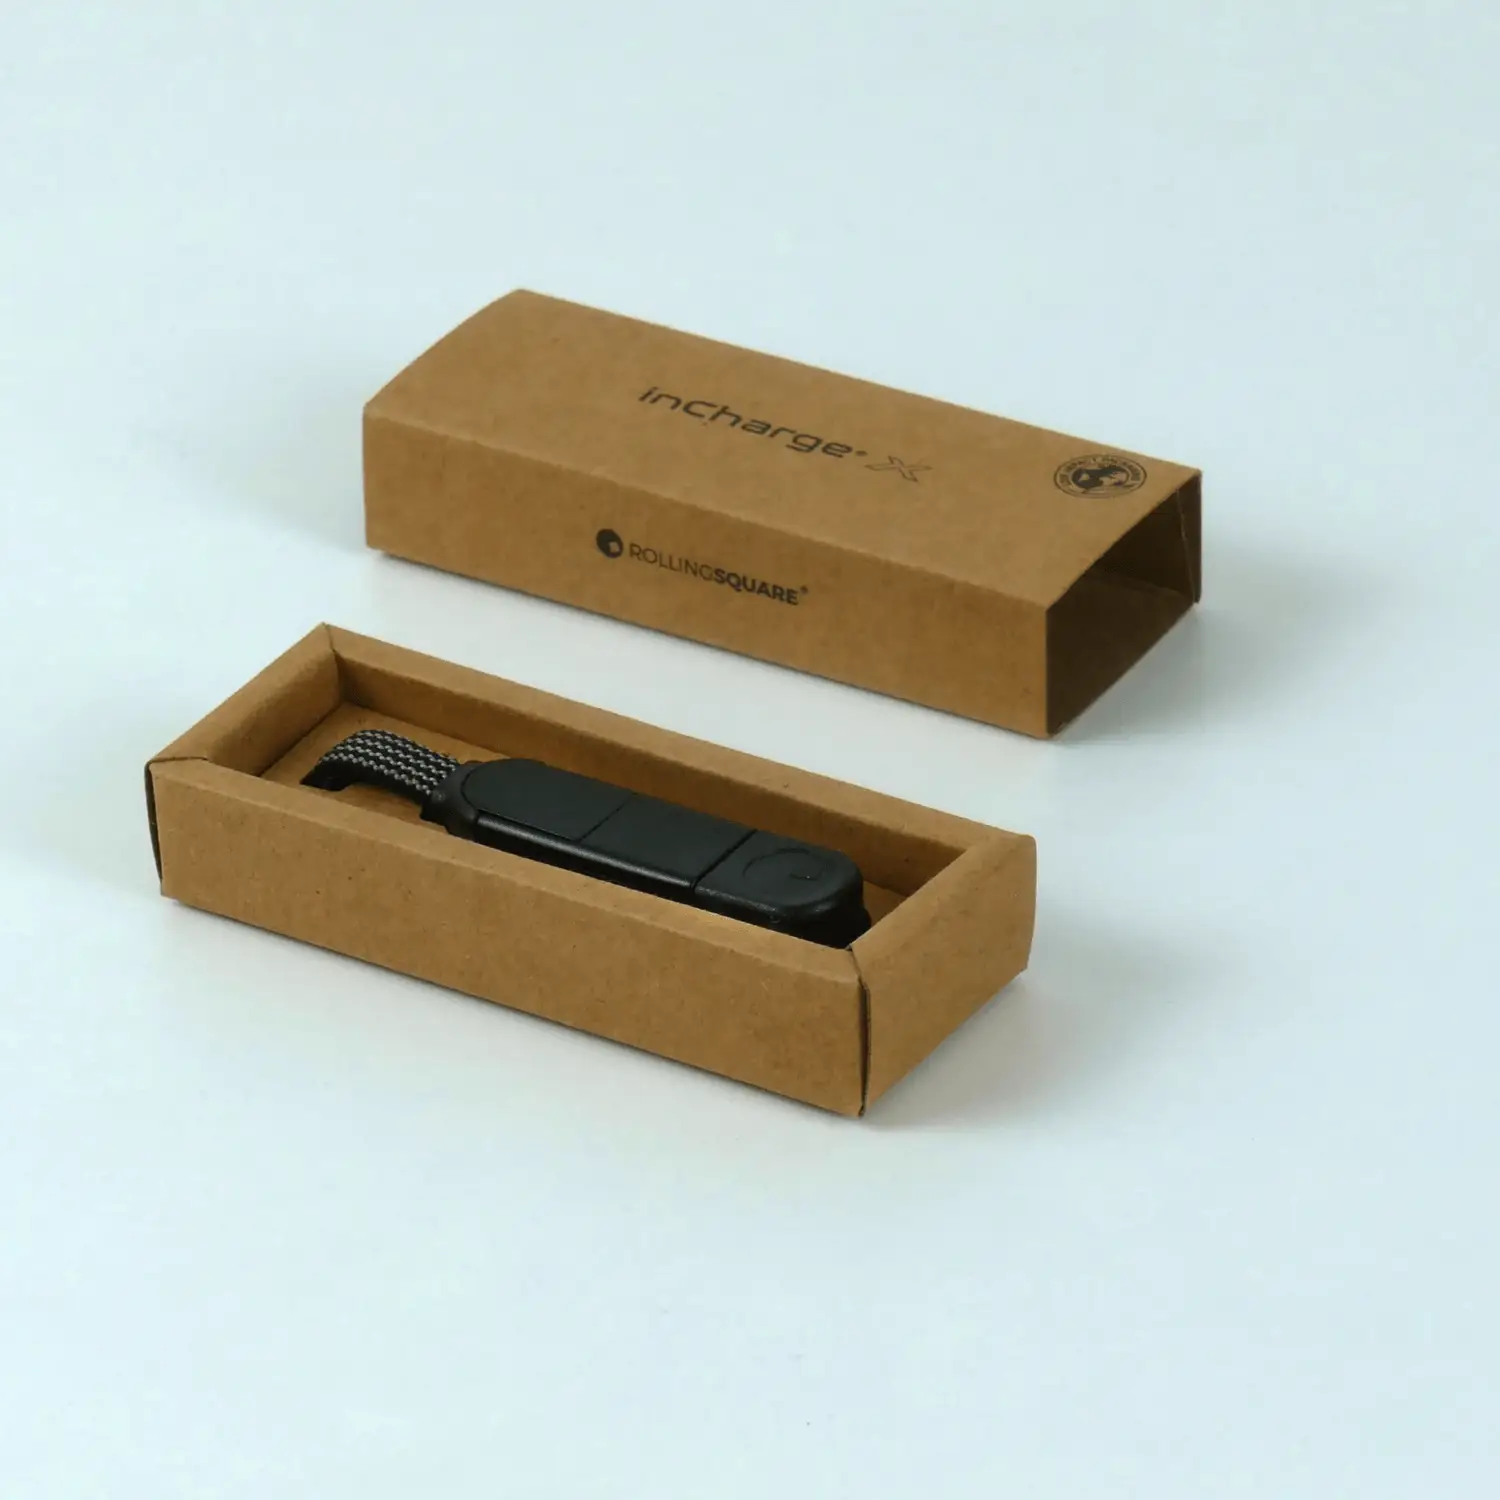 inCharge X - Retail Packaging 